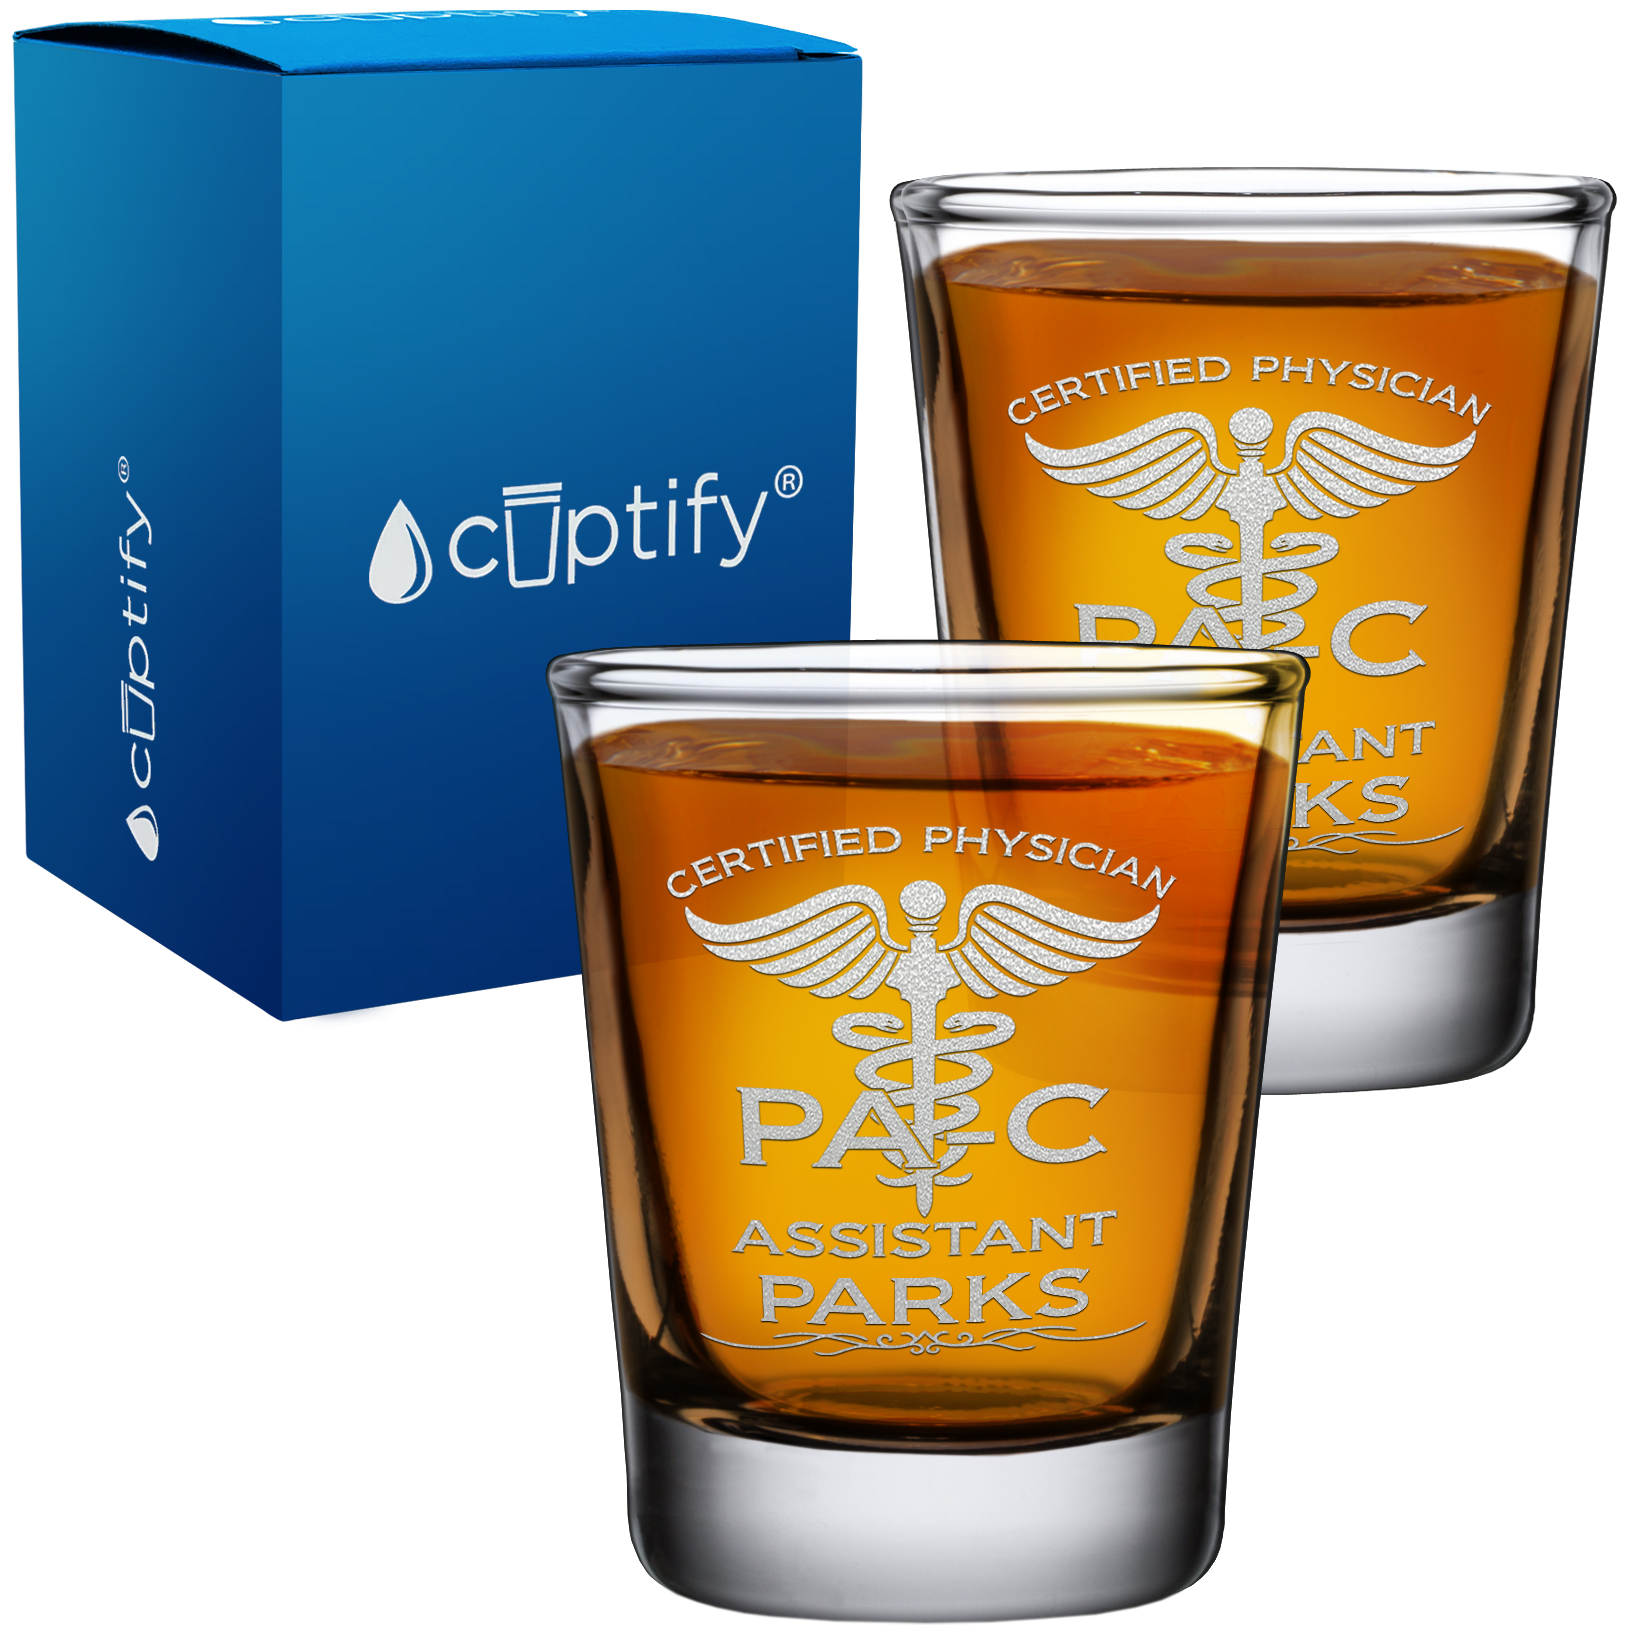 Personalized PA-C Certified Physician Assistant on 2oz Shot Glasses - Set of 2